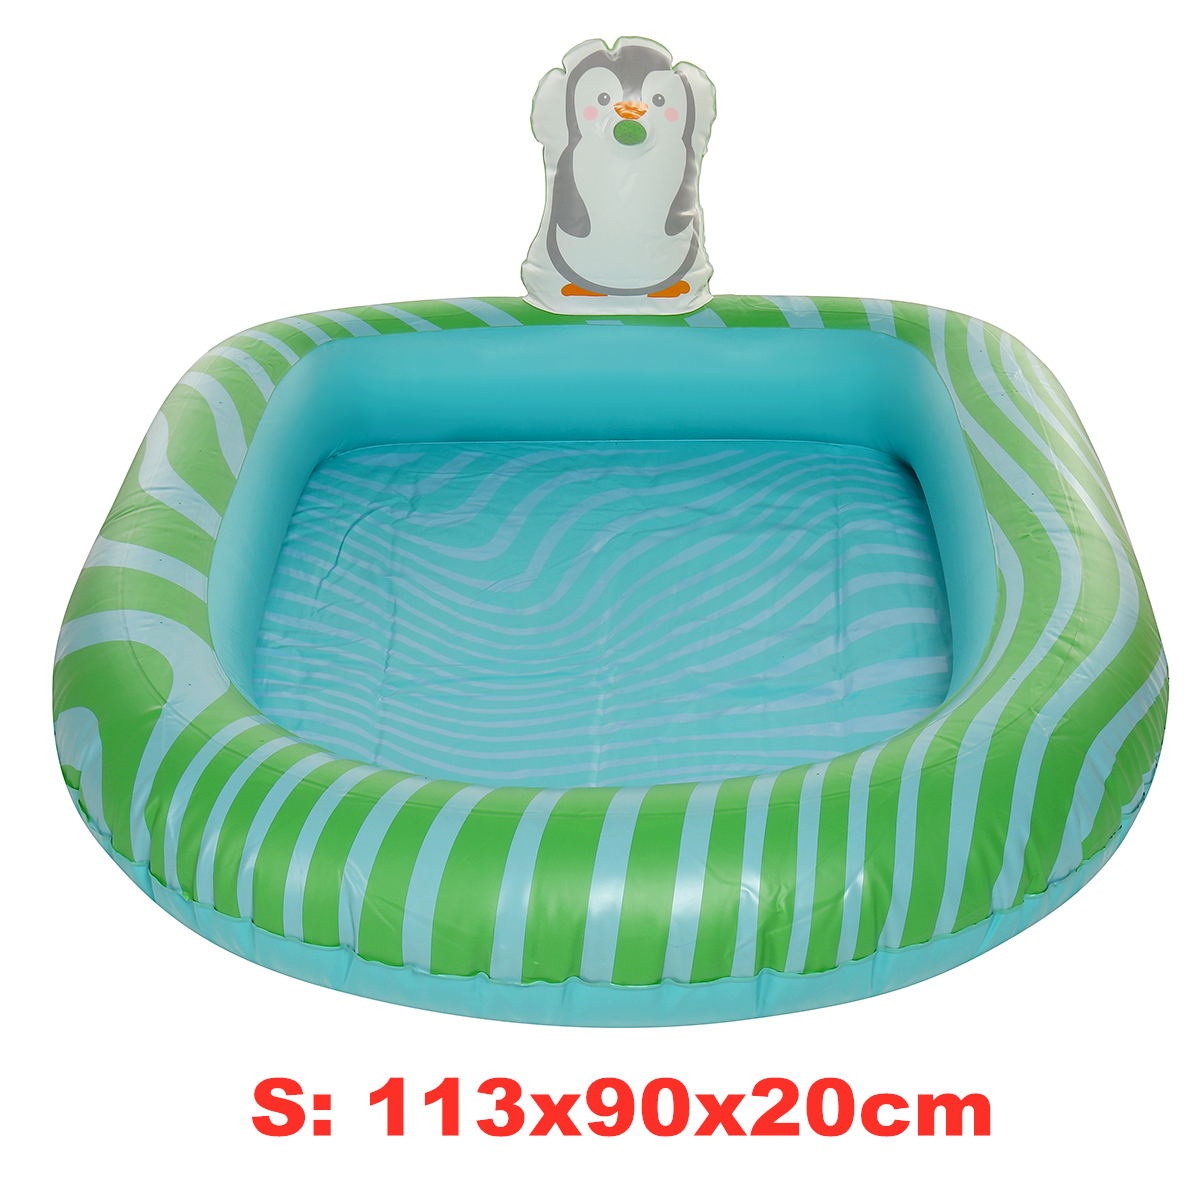 PVC-Children-Inflatable-Swimming-Pool-Sprinkler-Pool-Thickened-Cartoon-Pattern-Outdoor-Swimming-Wate-1851764-6